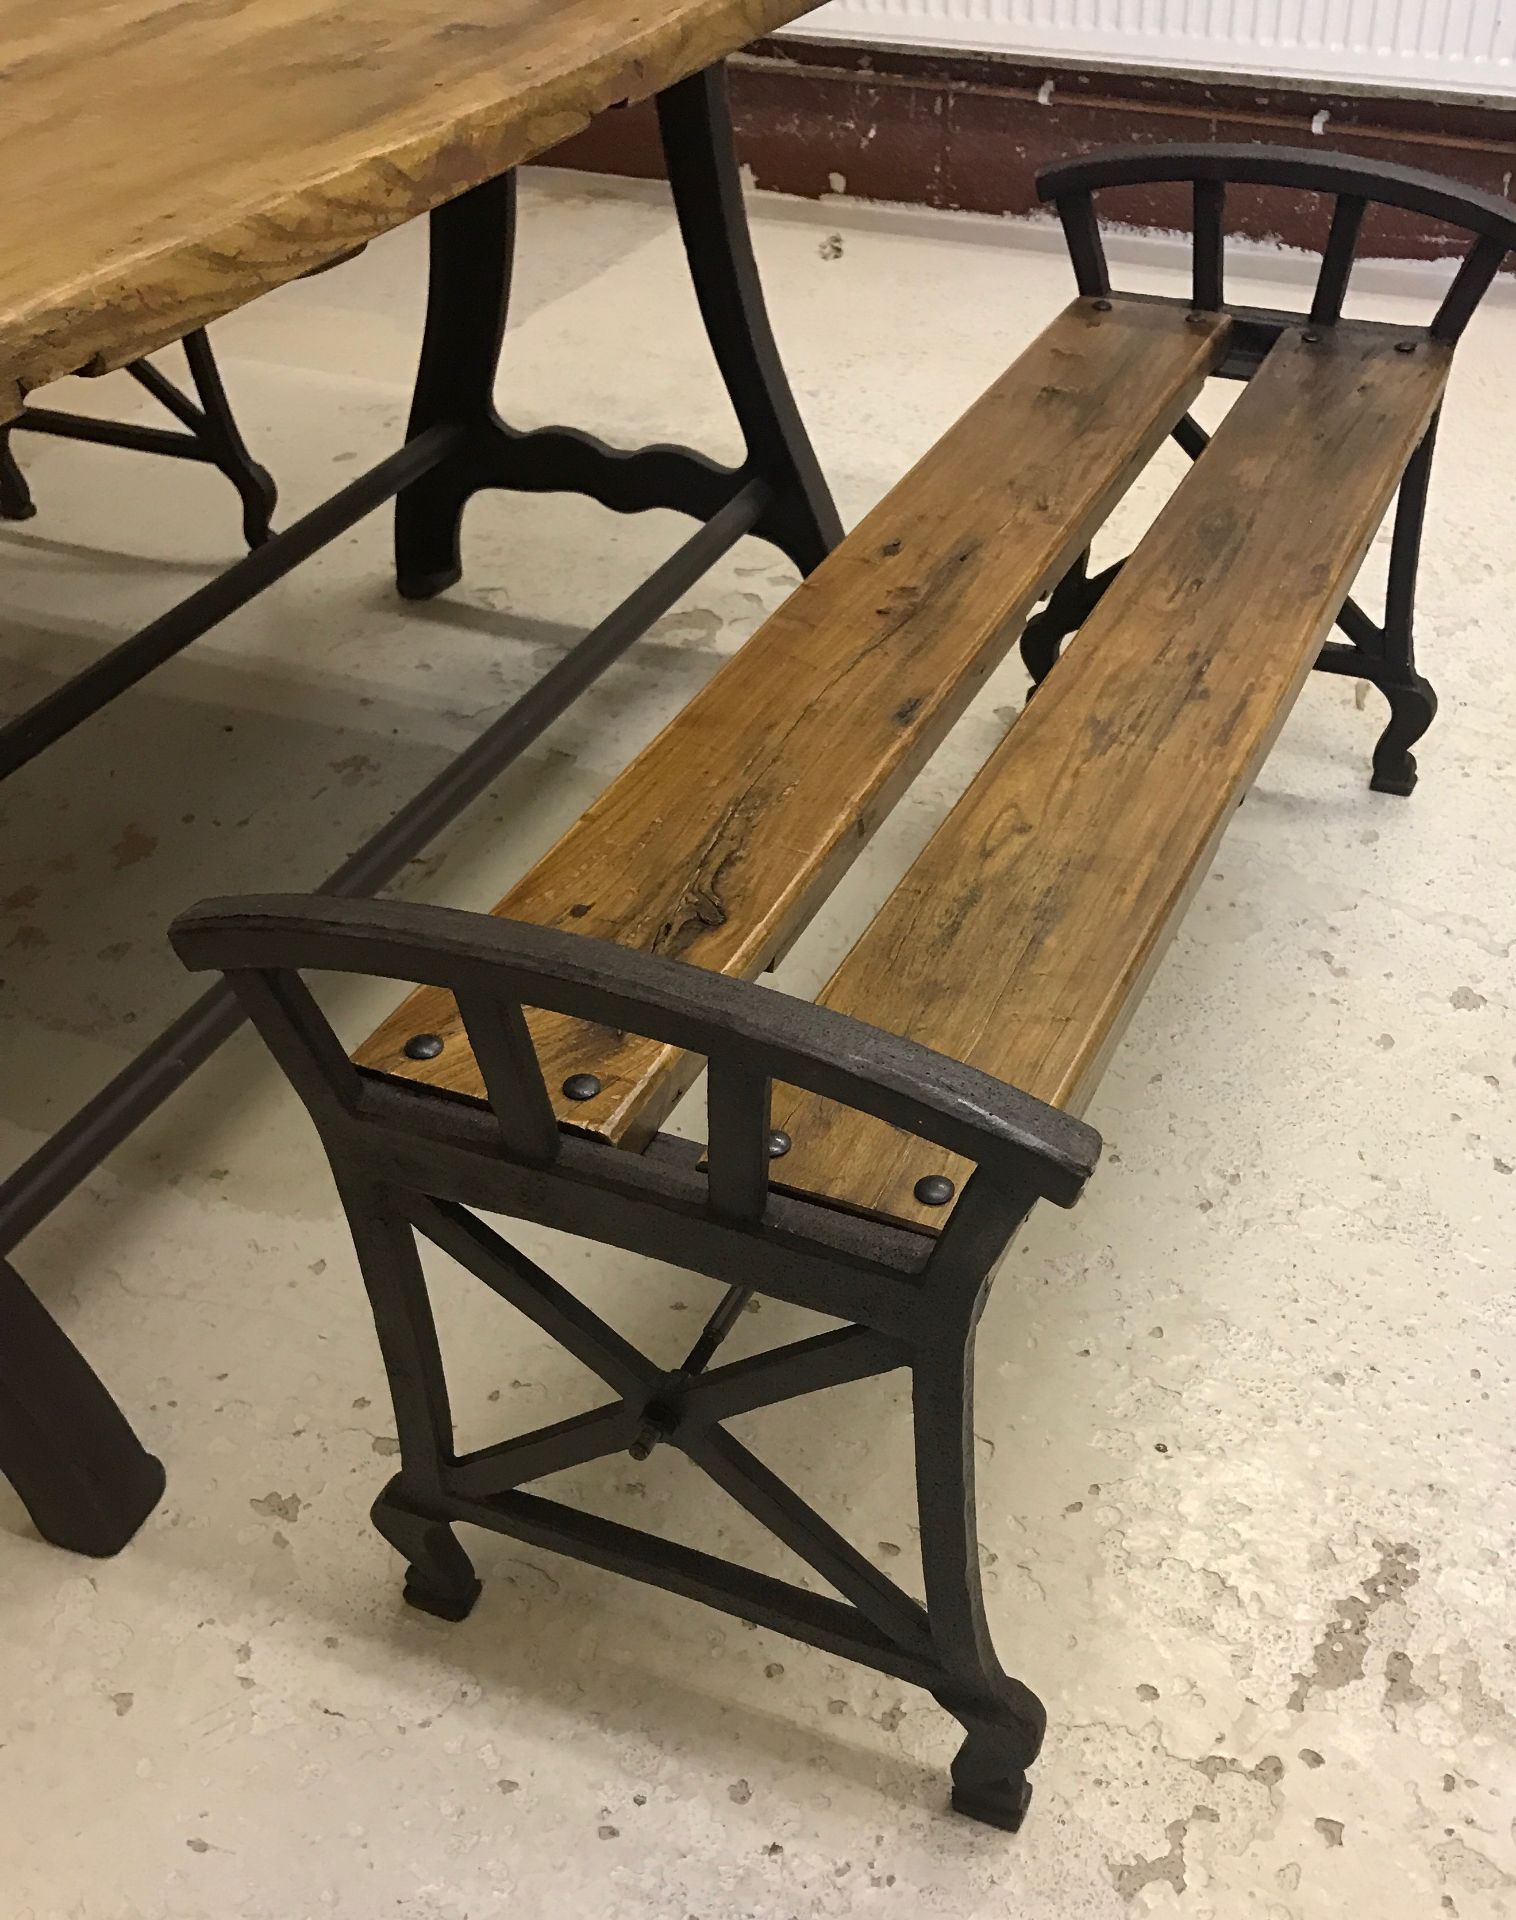 Pair of rustic benches with cast iron ends - Image 2 of 3